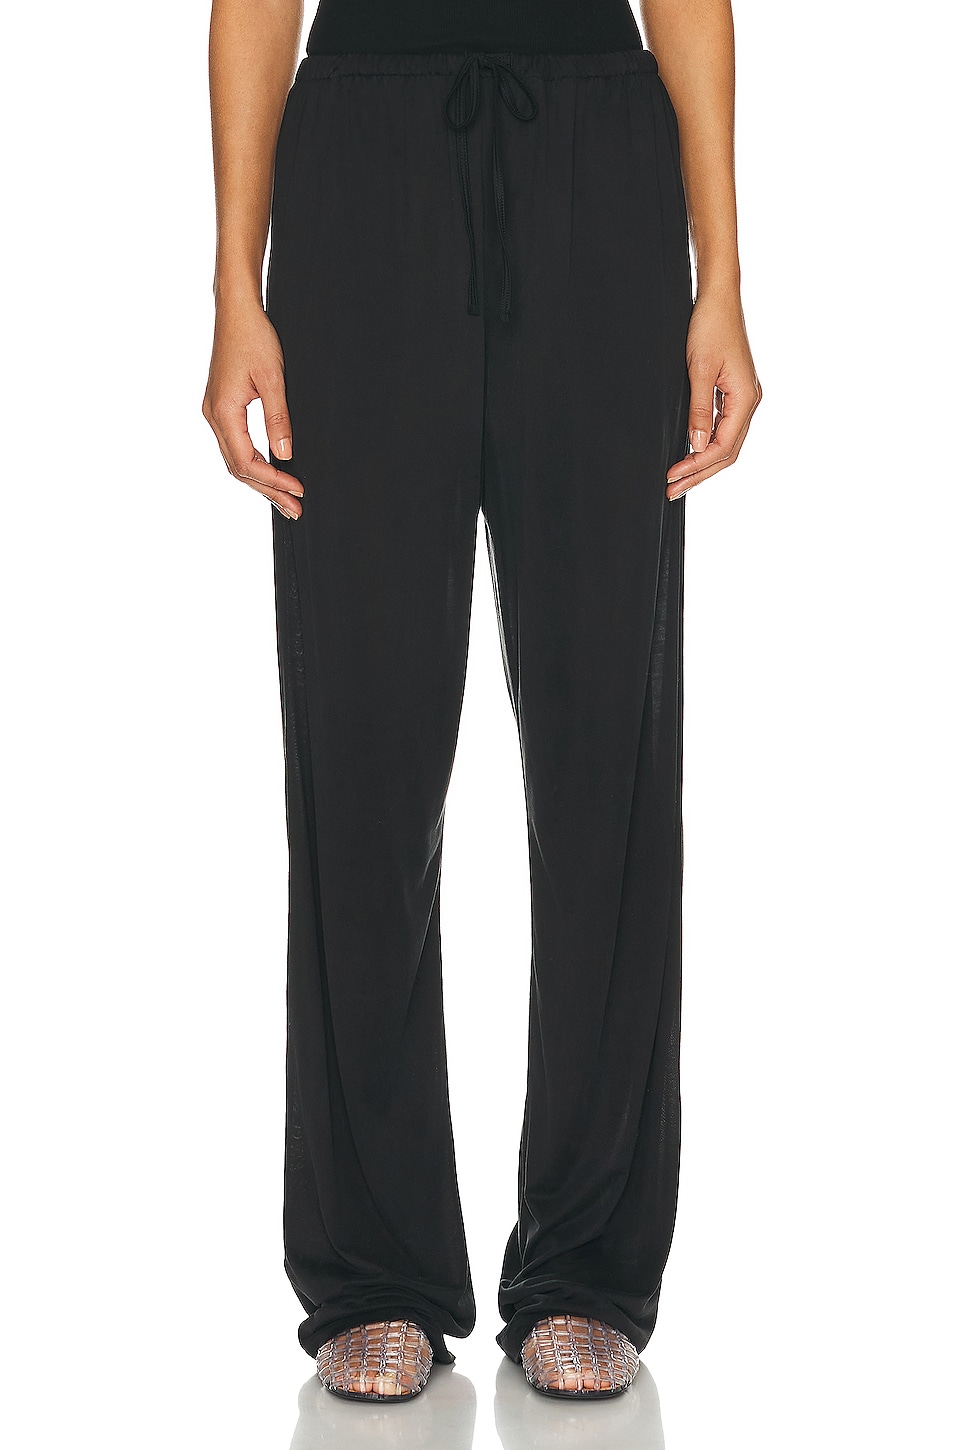 Image 1 of The Row Lanuit Pant in Black